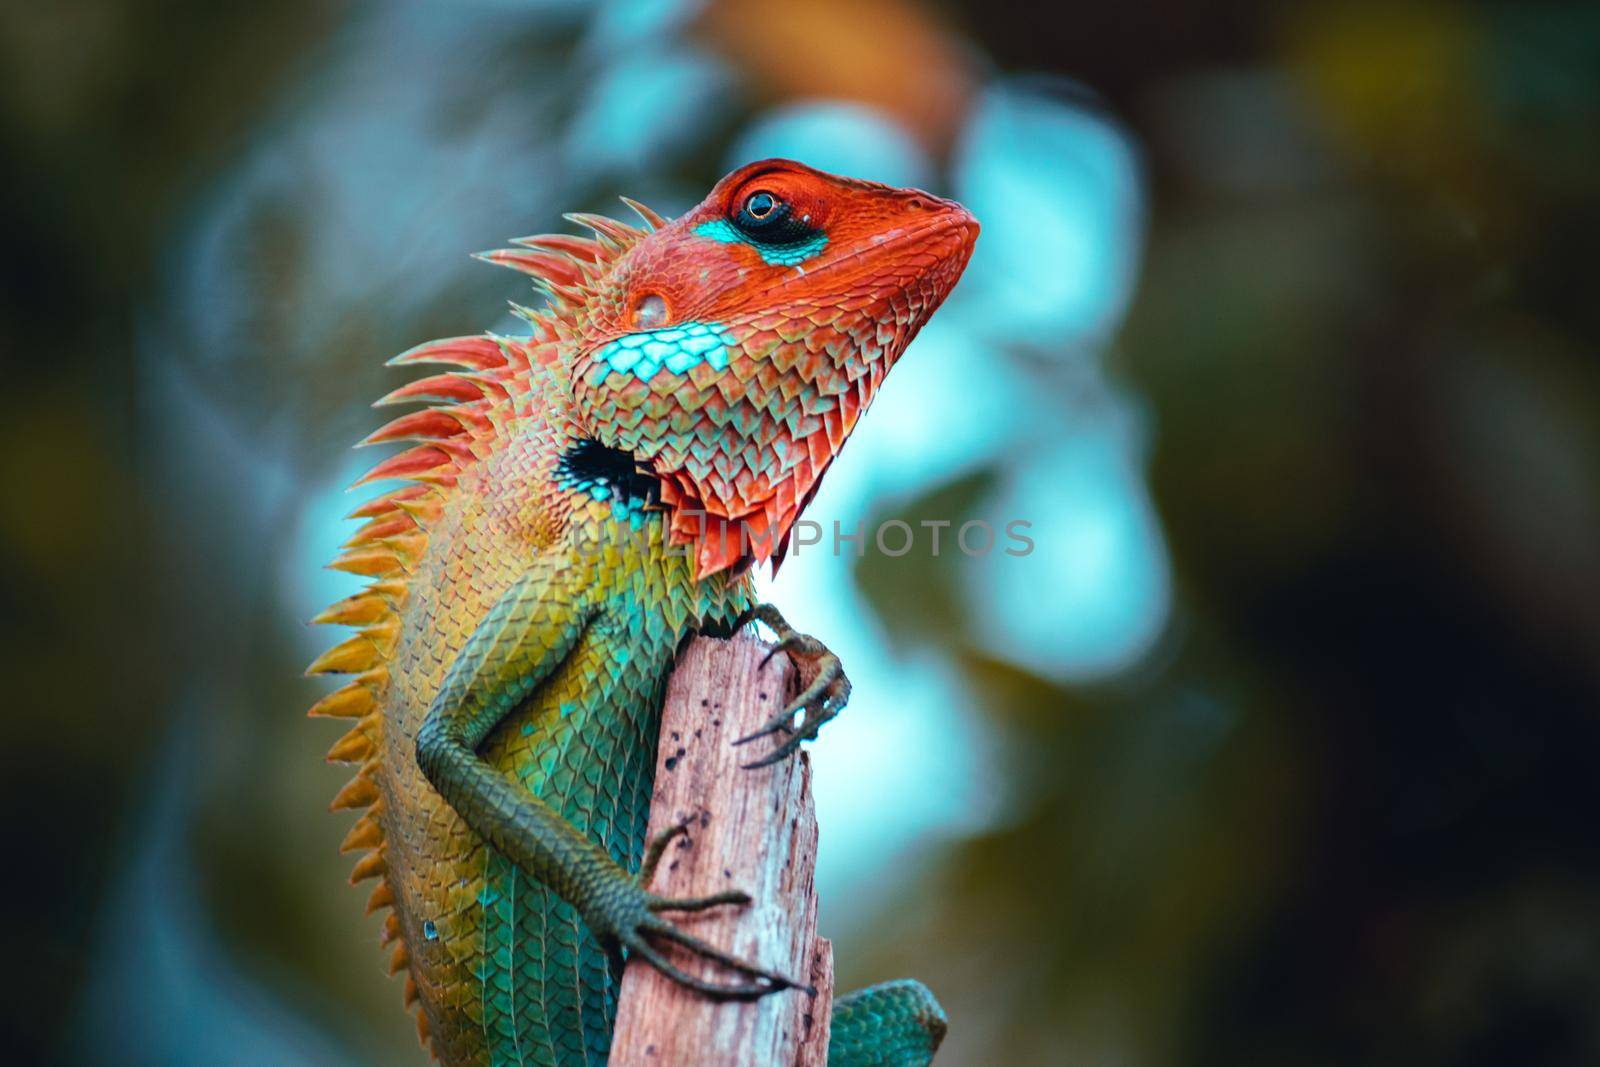 Green garden lizard showed up for a photoshoot, resting in a wooden pole, curious lizard looking at camera wondering head high, arrogant and stubborn attitude, colorful changeable bright gradient skin